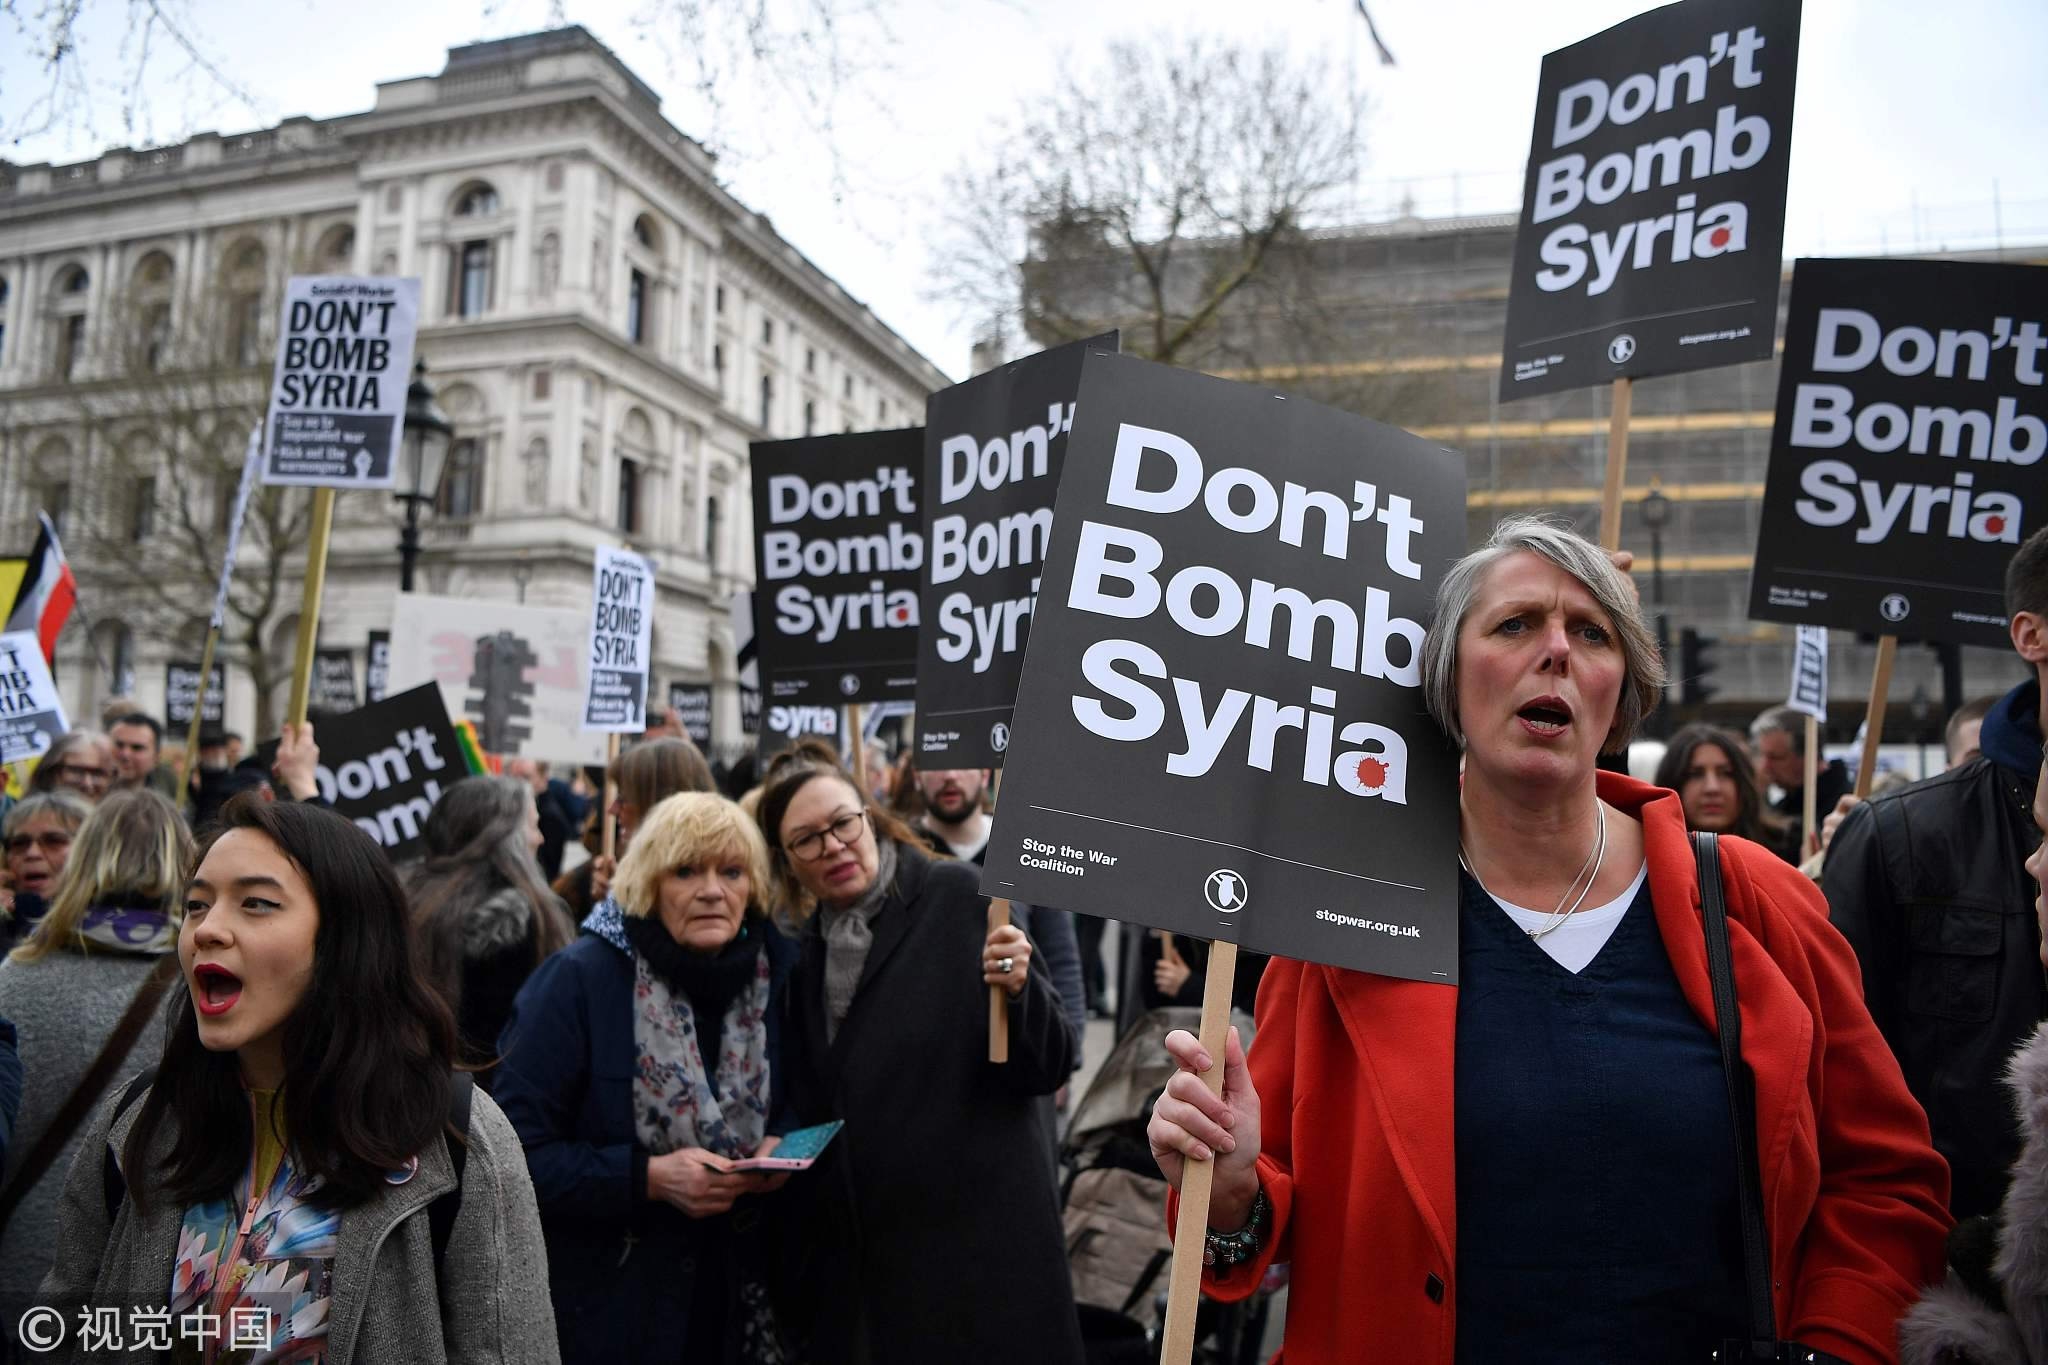 UK Protests, Theresa May, British military strike, Syria war, Syrian chemical weapons, War Powers Act